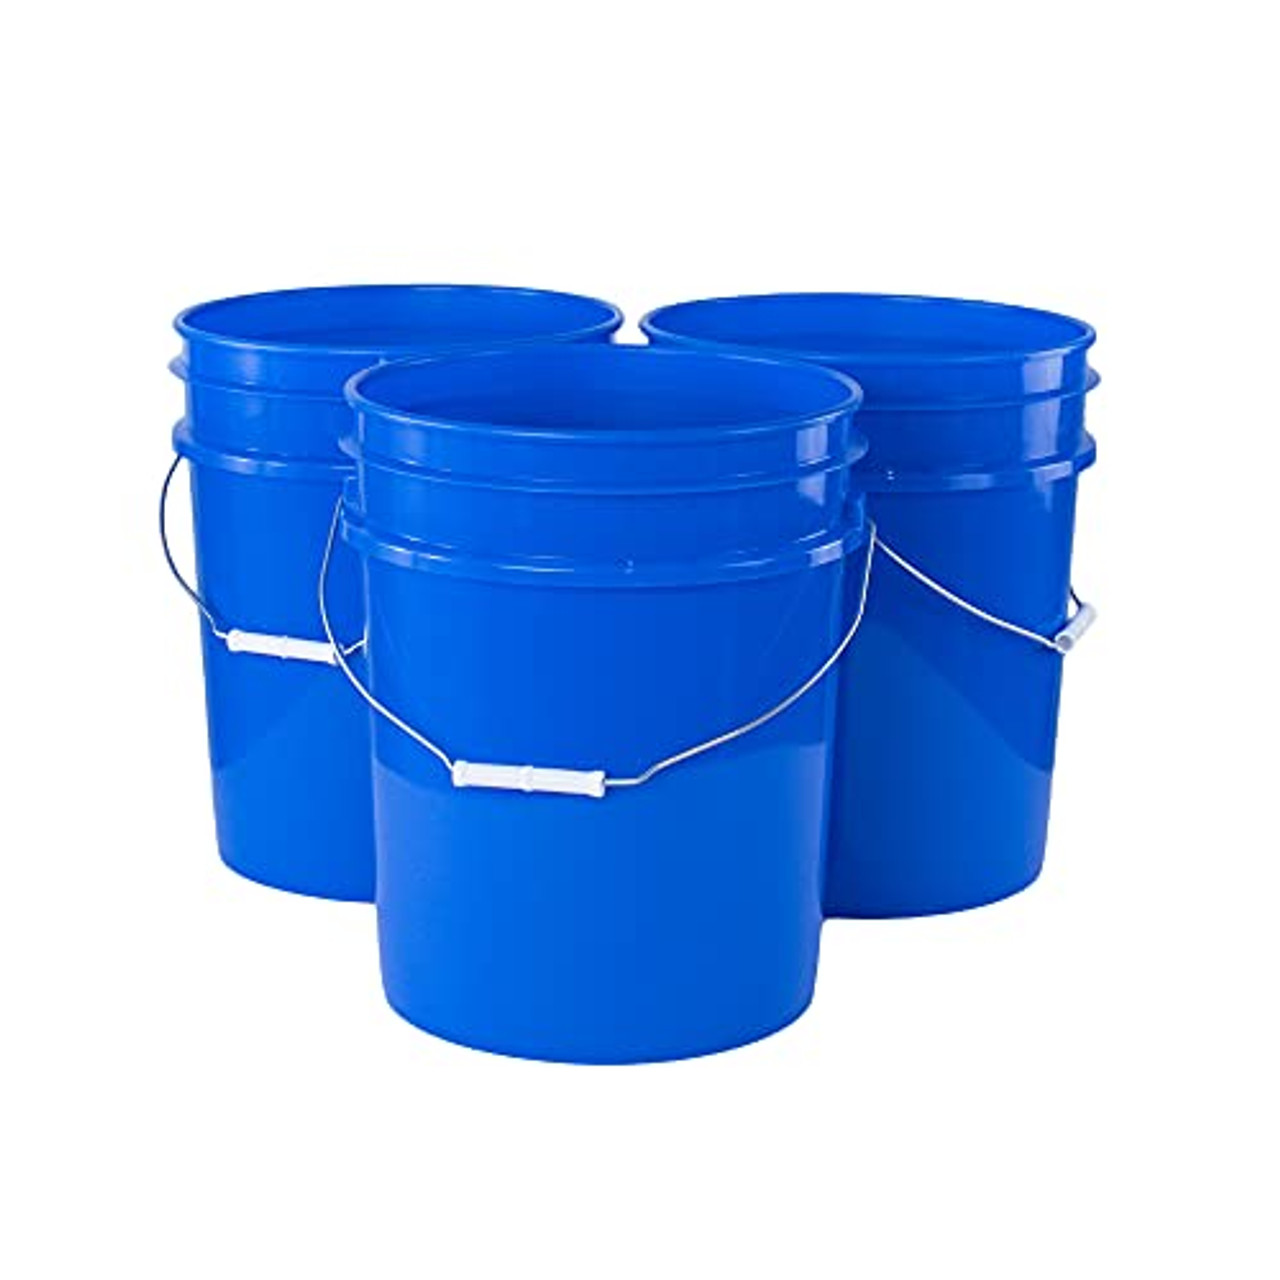 5 Gallon White Bucket with Color Gamma Lid and Ergonomic Grip